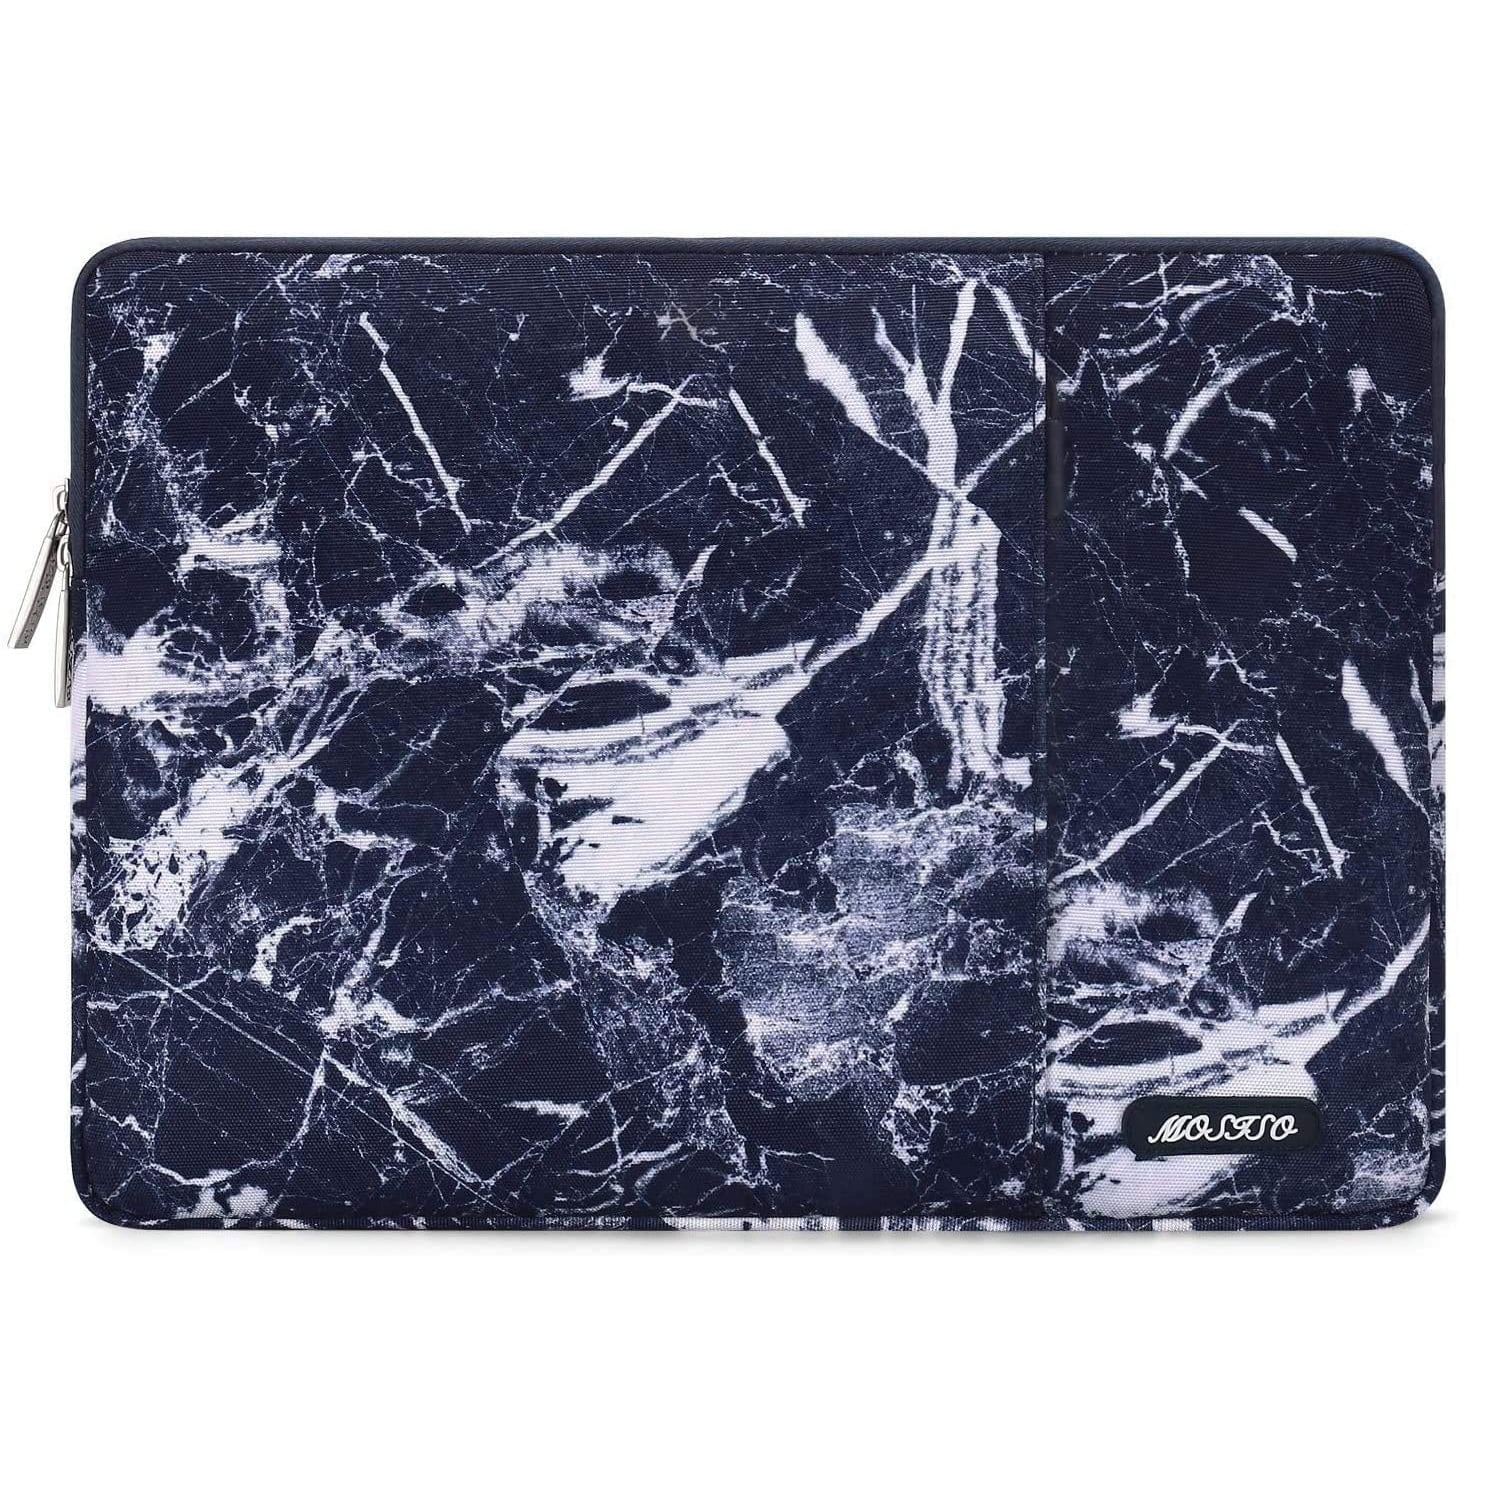 Retry iPad Anime Laptop Sleeve MacBook Pro Anime Device Protector Air Anime Laptop Case Windows Devices & Tablets Demon Lord